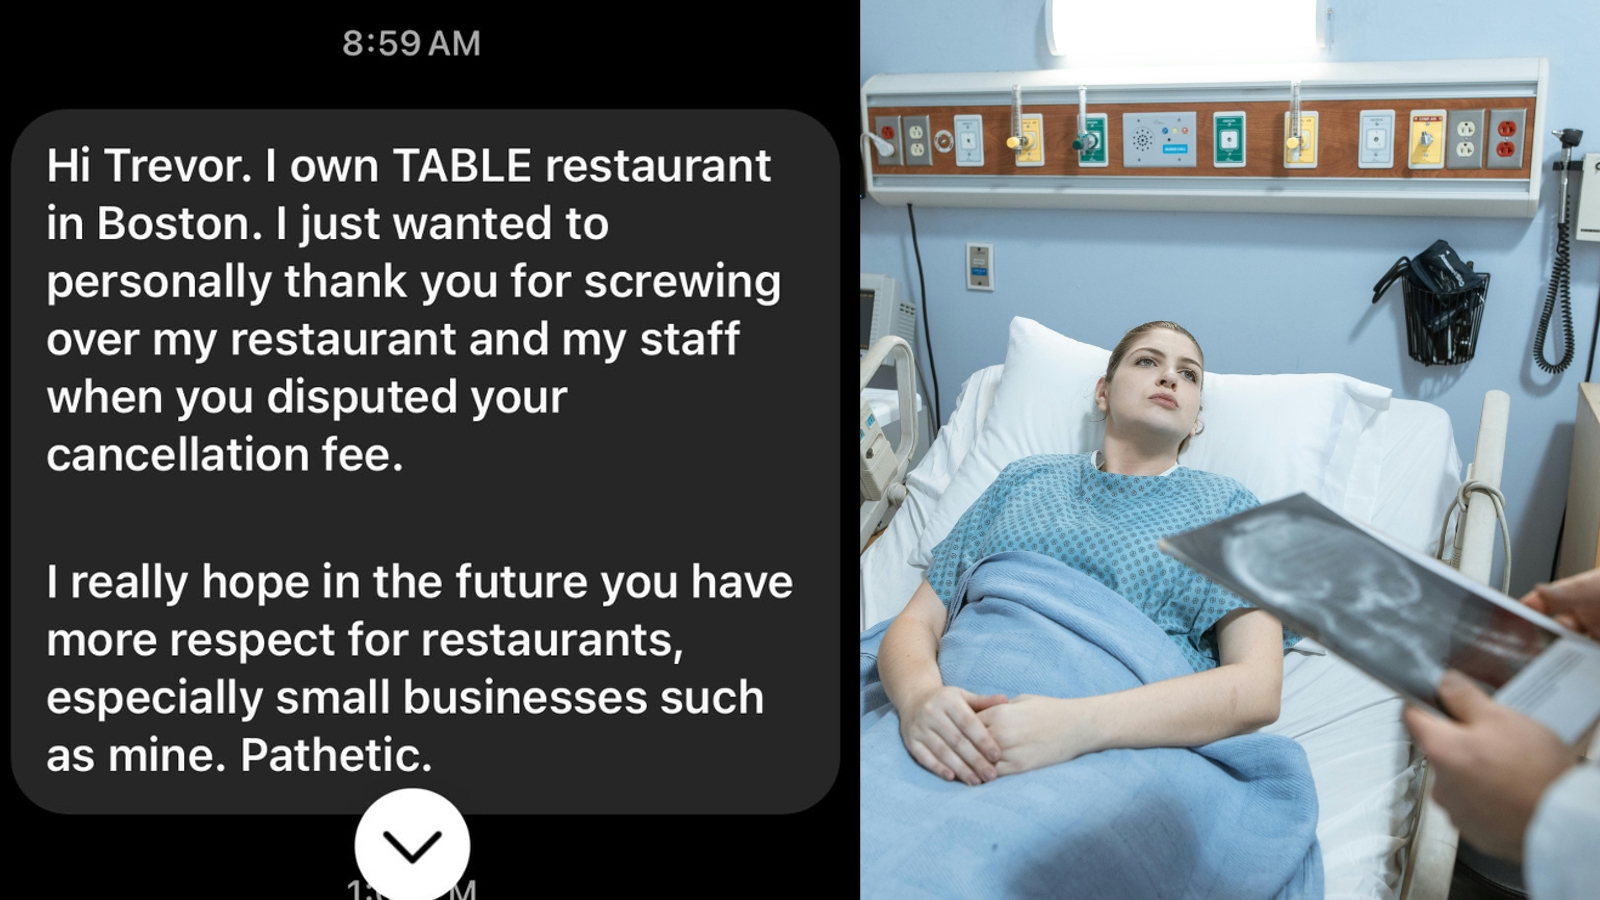 Hospitalized person receives “gross” message from restaurant owner after cancellation - Dexerto